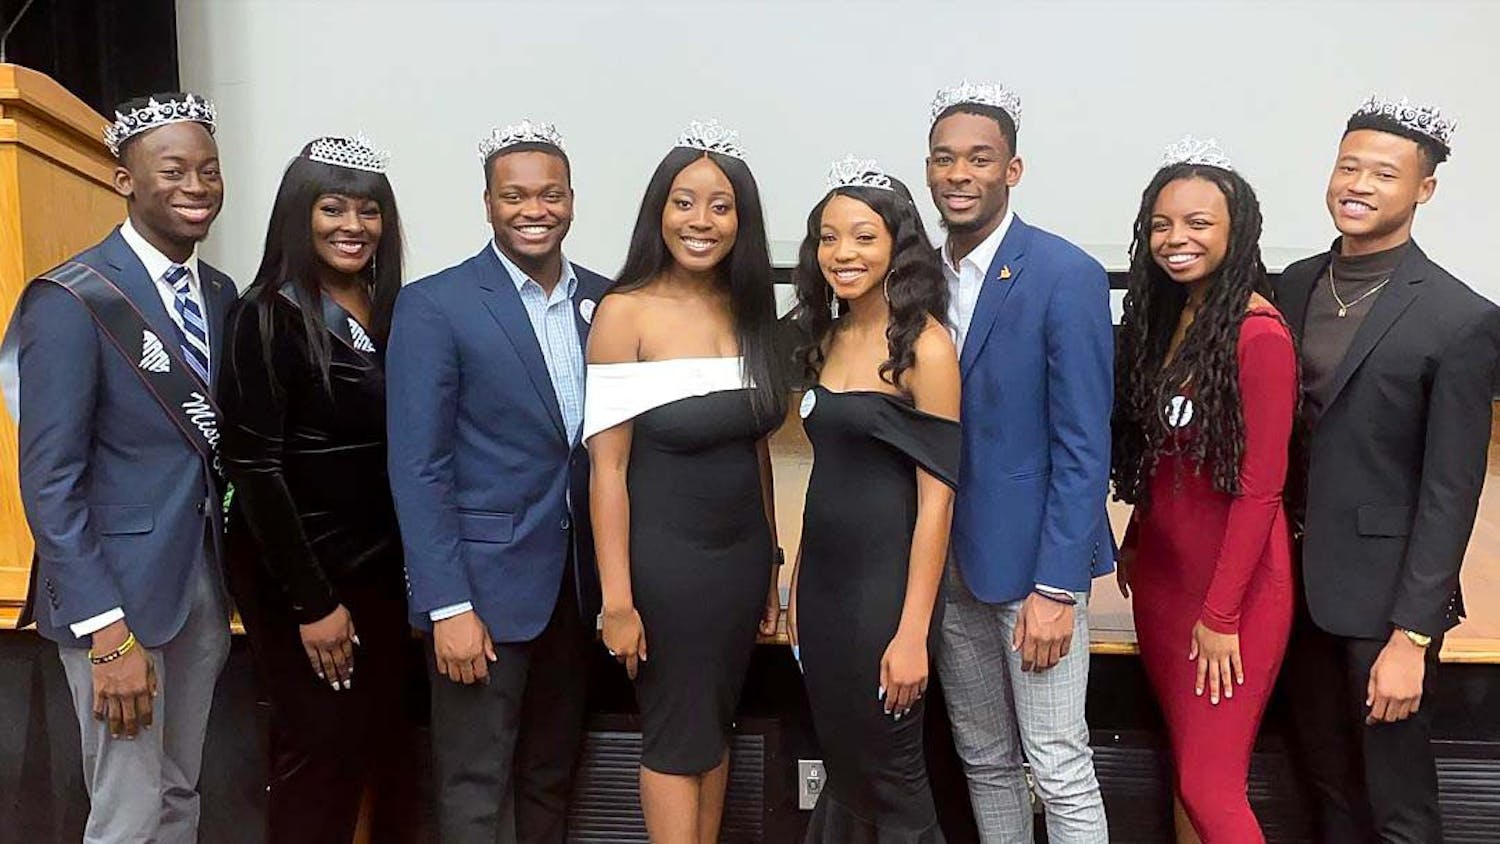 The 2019-2020 Mister and Miss Black USC winners showing off their crowns. This year's pageant will be the first one held on Oct. 26.